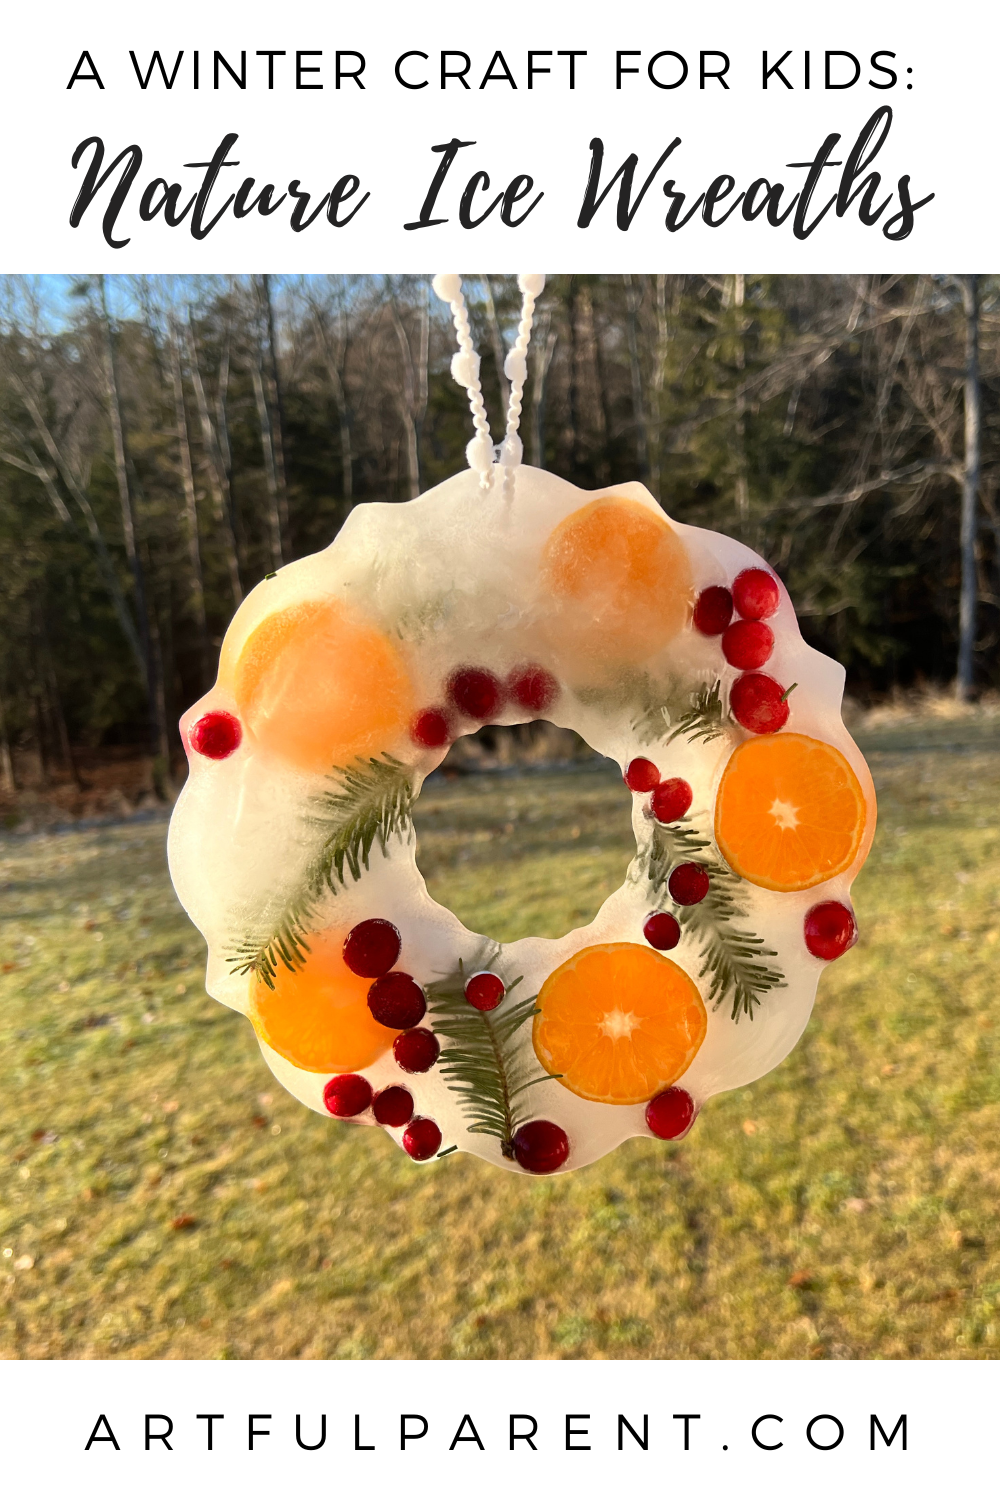 A Winter Craft for Kids: How to Make an Ice Wreath